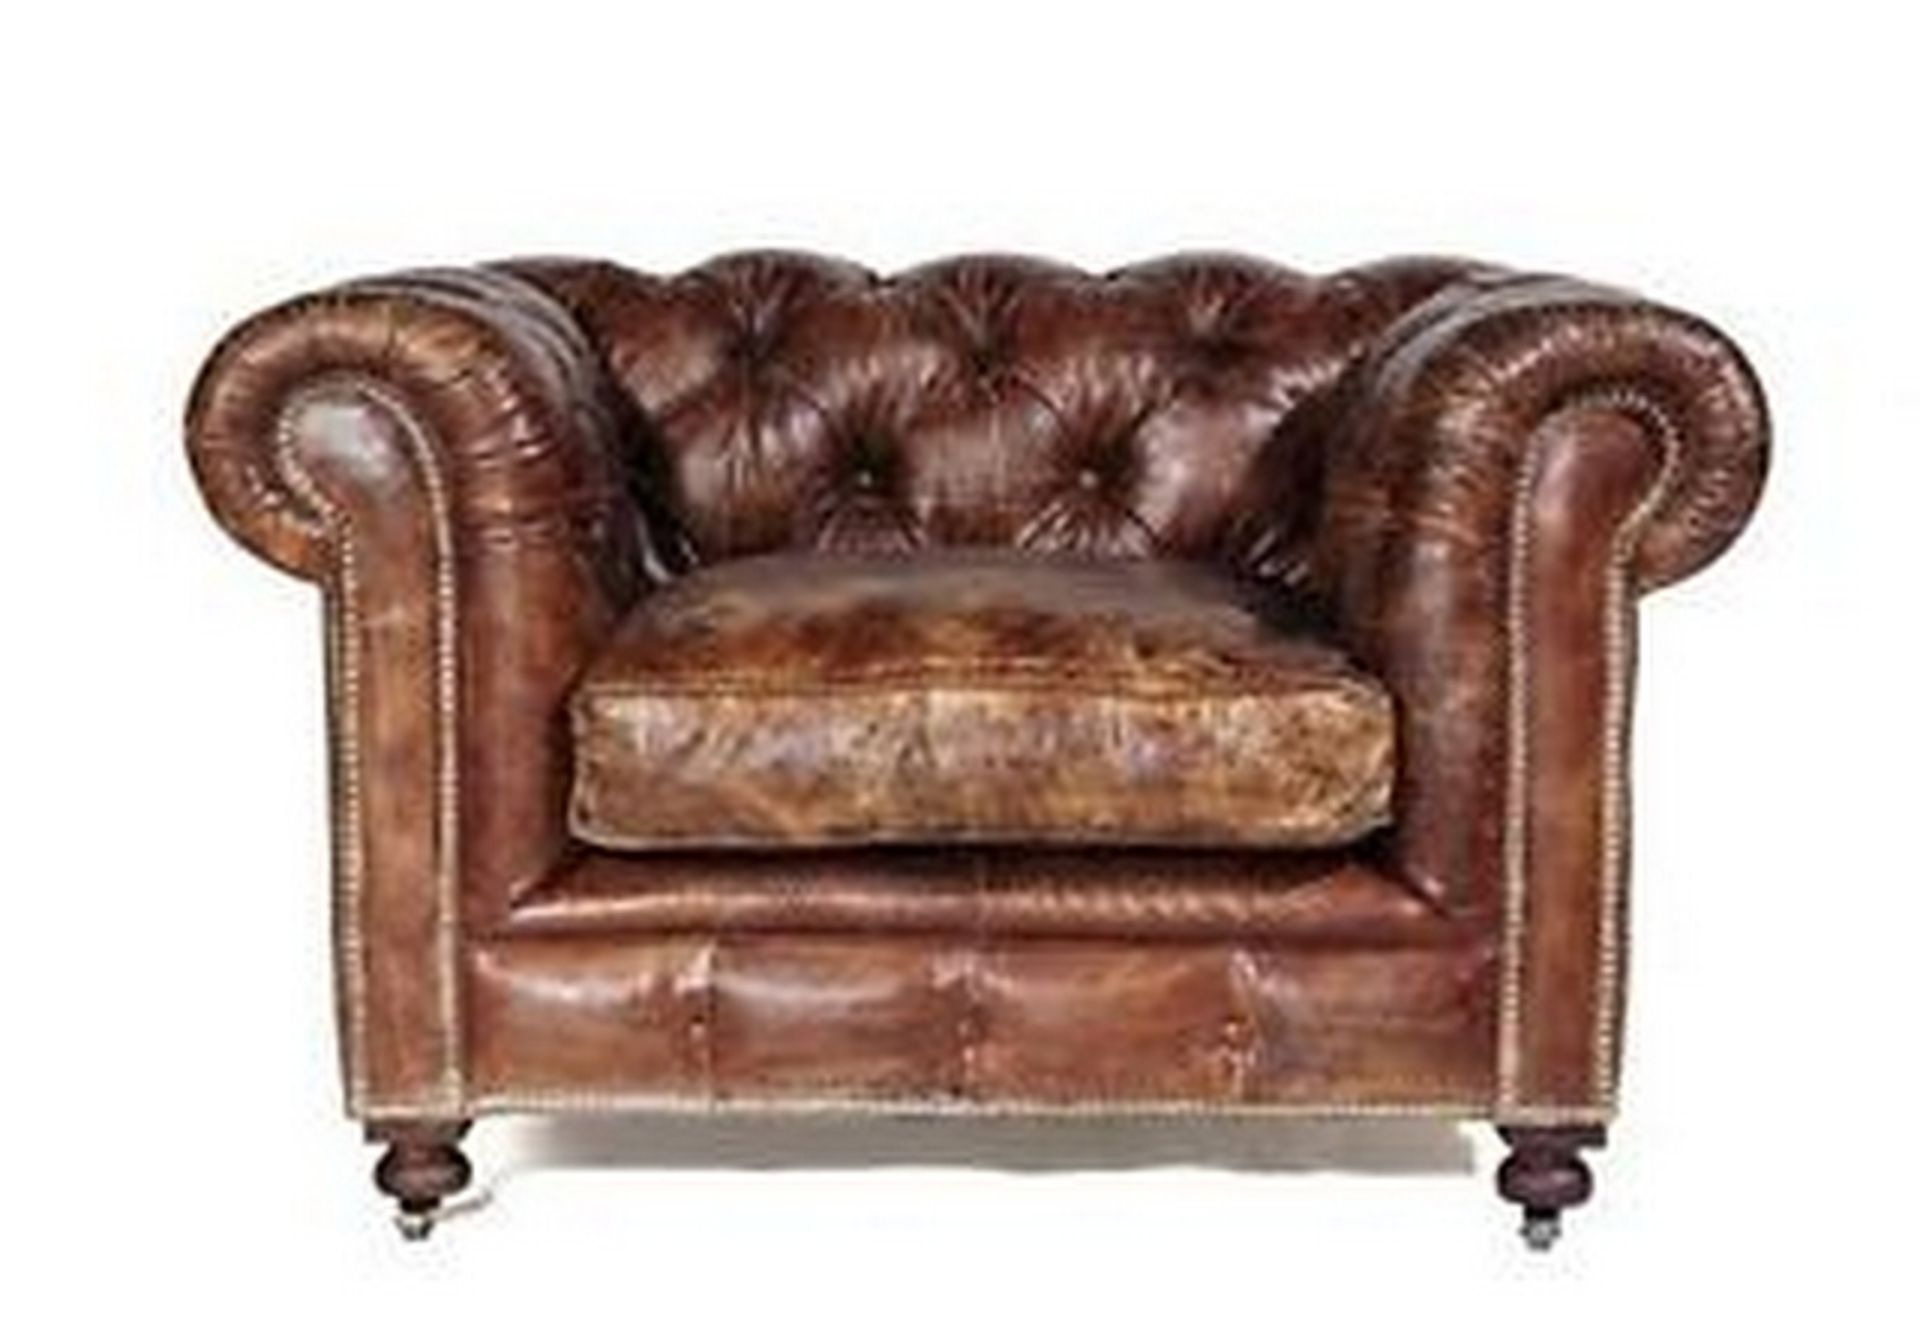 Kensington Sofa Single Seater Well-Mannered Style Featuring The Natural Tones Of Timber And